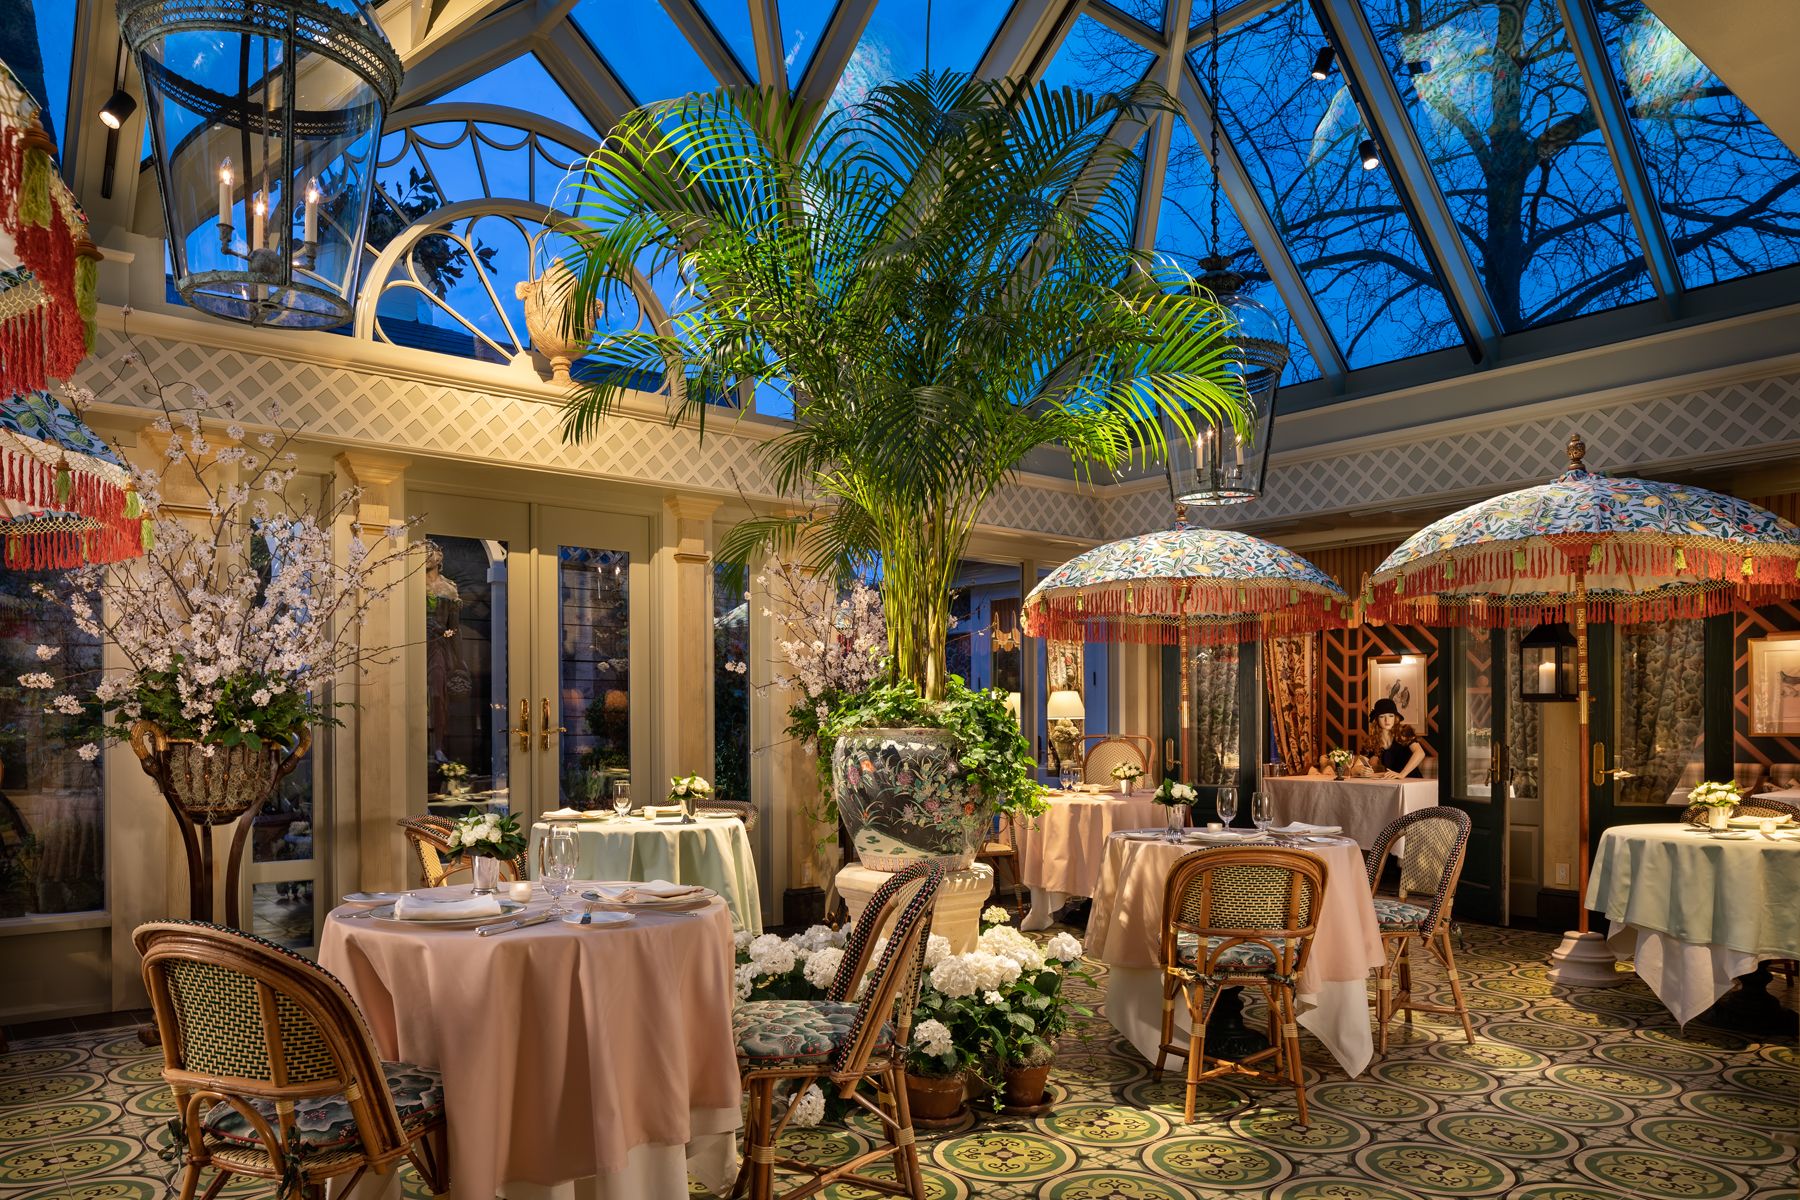 The decadent "conservatory" room at the Inn with umbrellas, palm trees and a skylight dome.